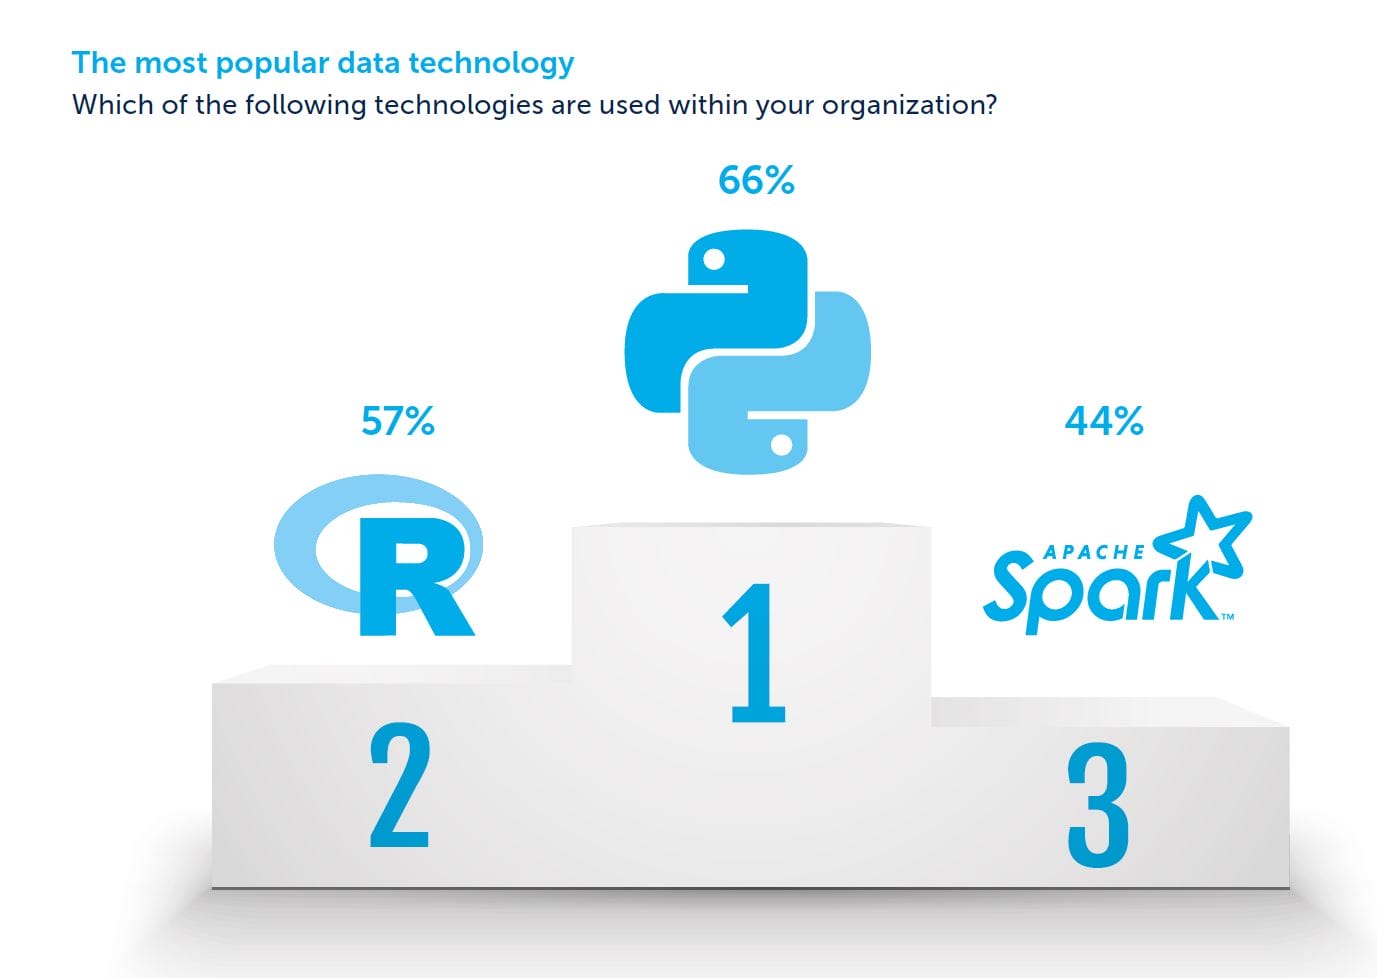 Which technologies are used within your organization